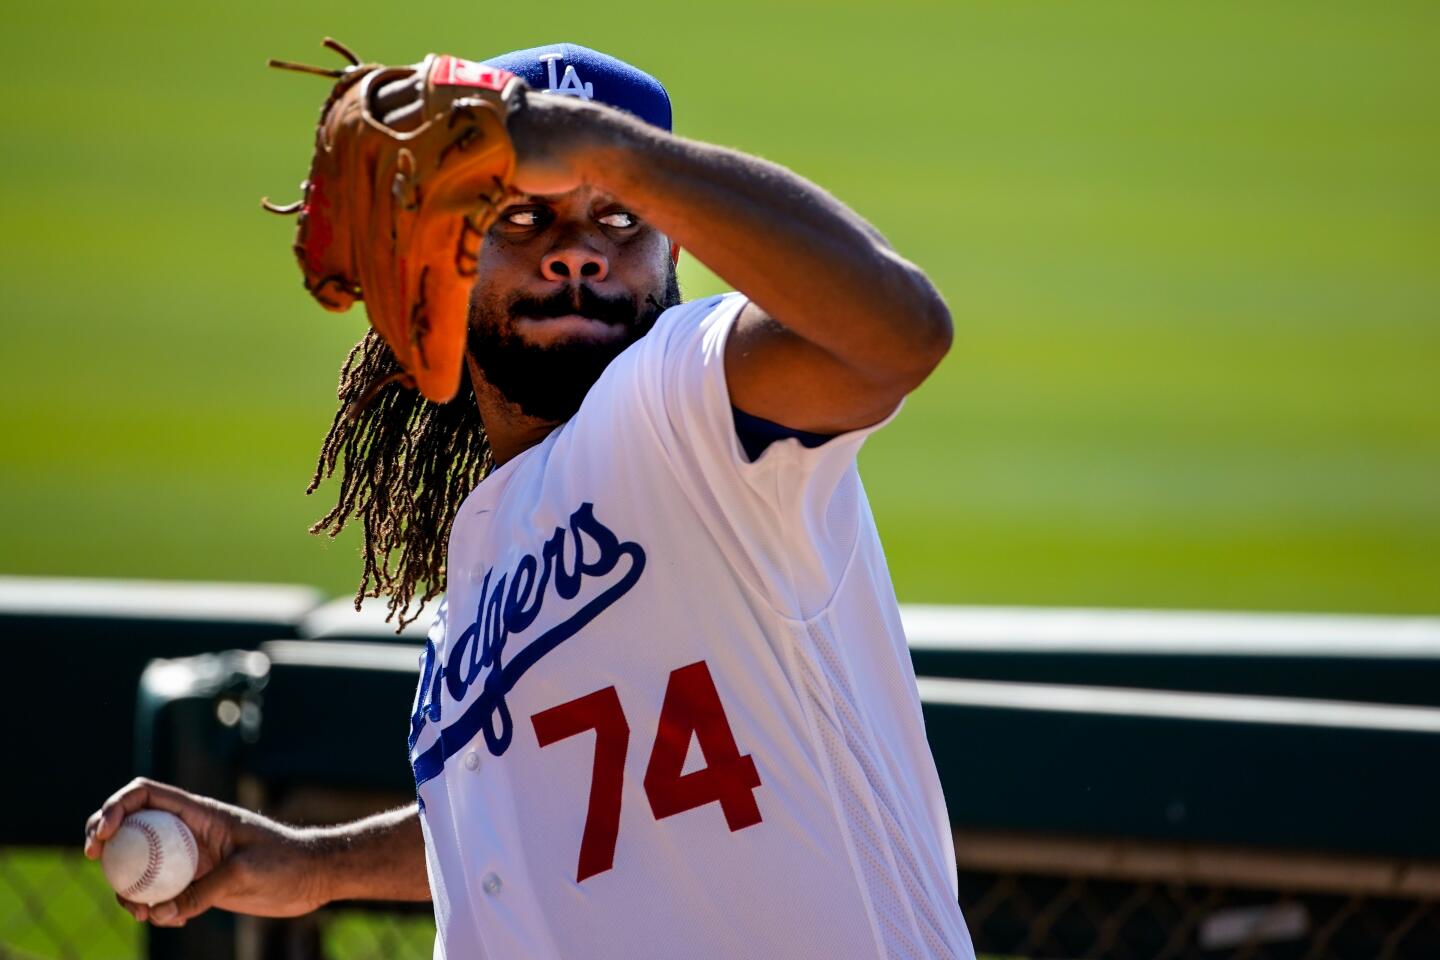 Dodgers closer Kenley Jansen works in the bullpen during a spring training session at Camelback Ranch.